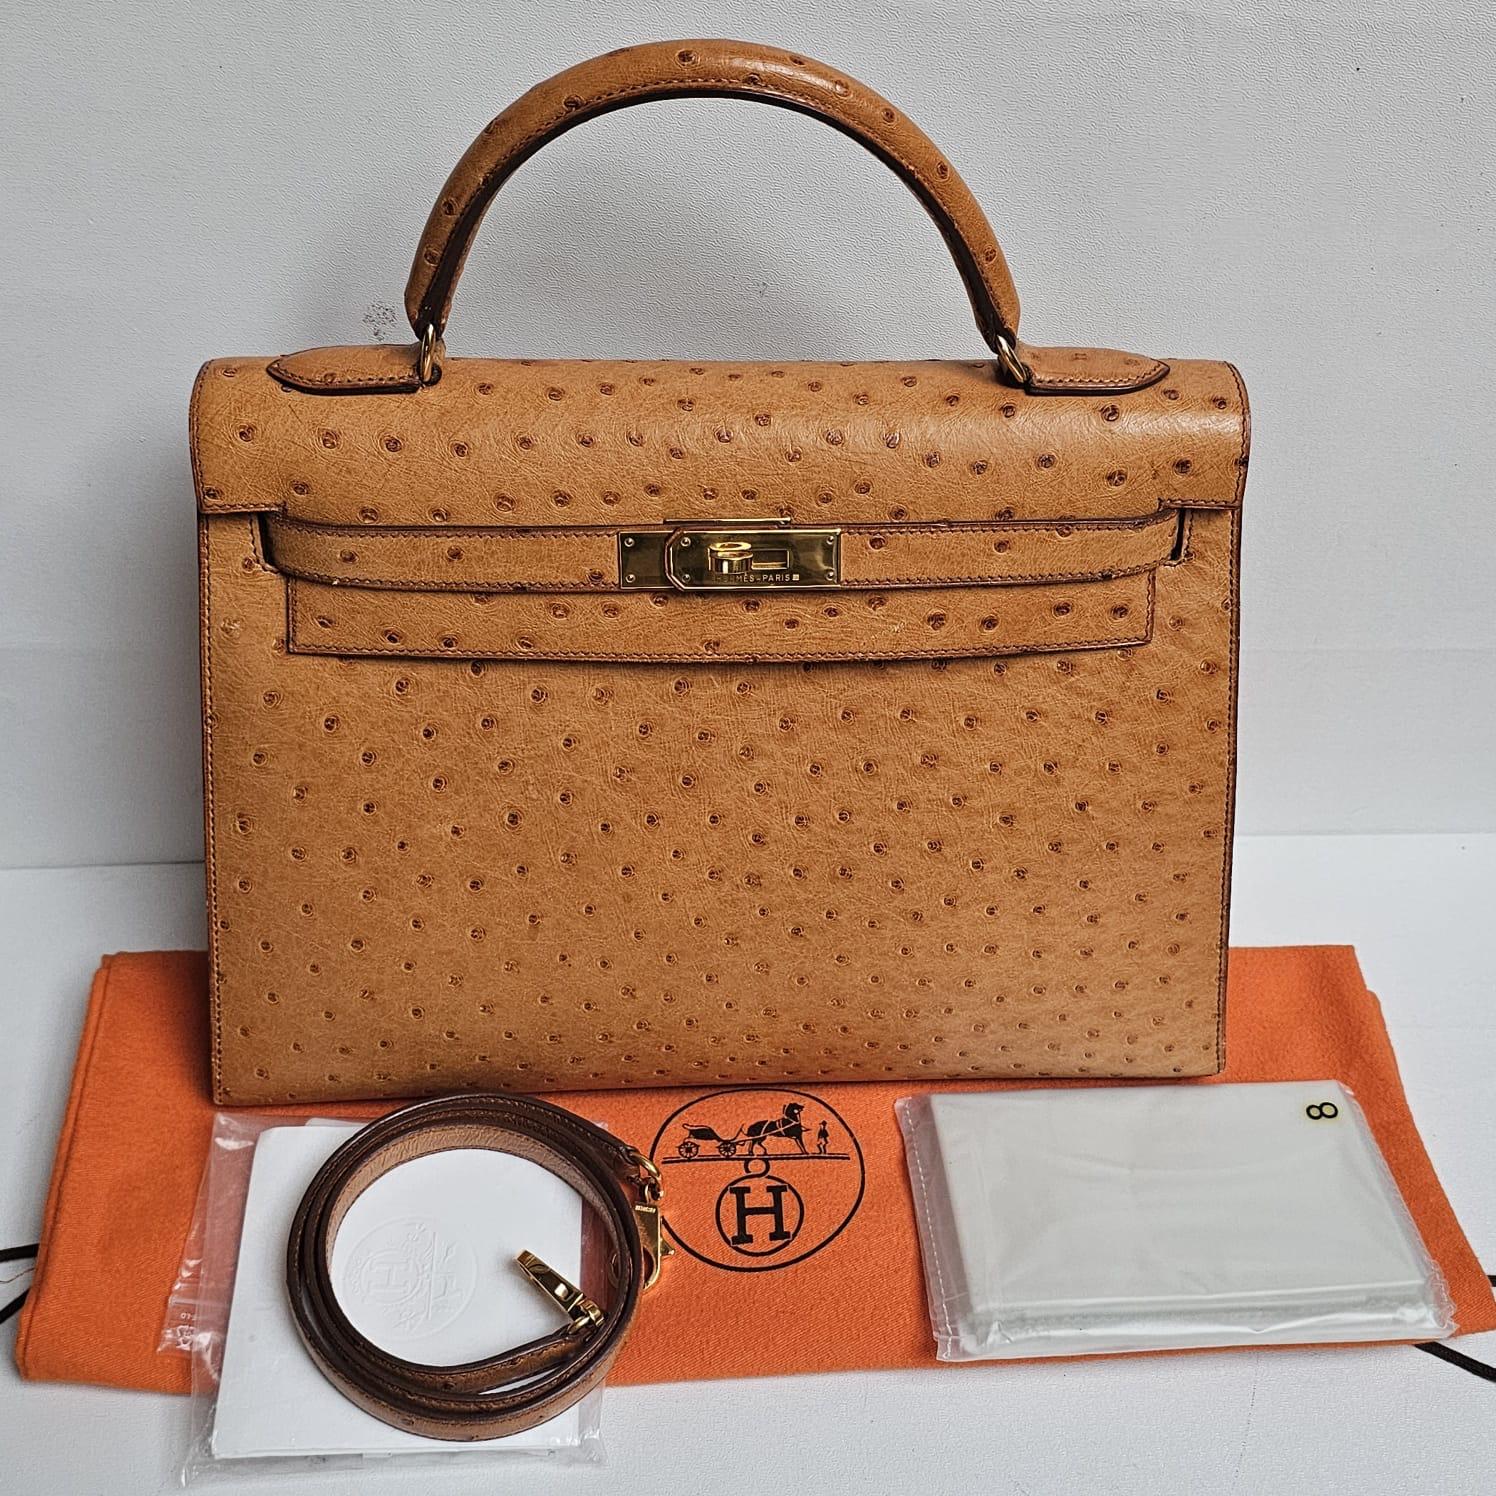 Beautiful vintage kelly ostrich in cognac (gold-like) with gold hardware. Minor scratch on the bottom part of the flap. Light tarnishing and marks on the leather but overall still in pristine vintage condition. Stamp Circle X (1994). Comes with its